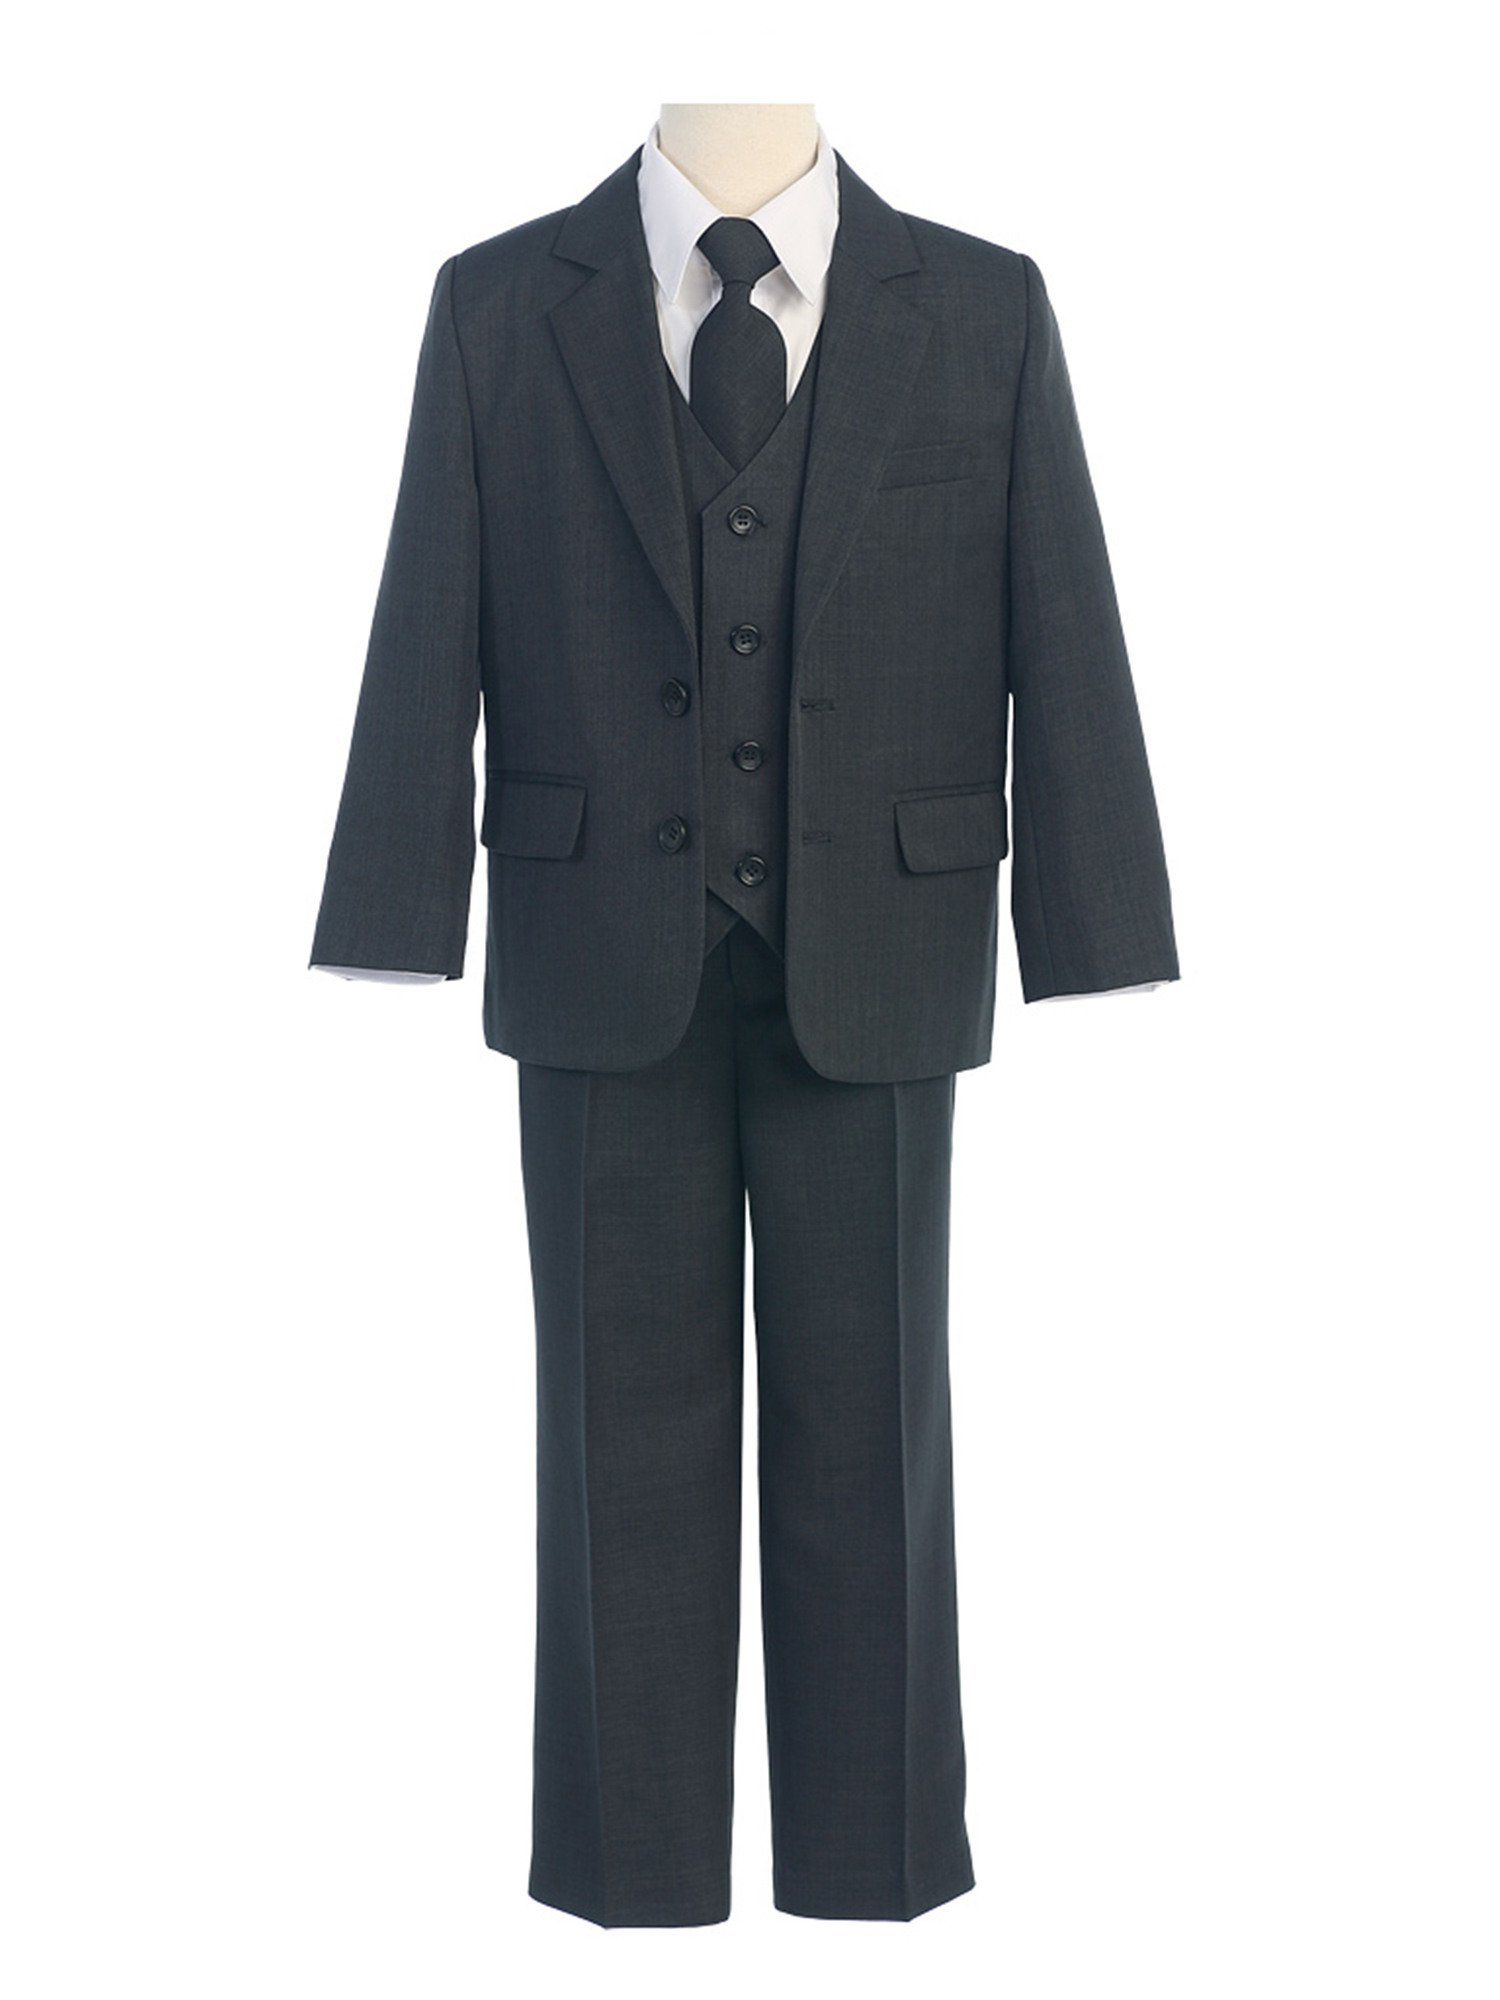 COLE Boys Suit with Shirt and Vest (5-Piece) - Charcoal Grey - Size 12